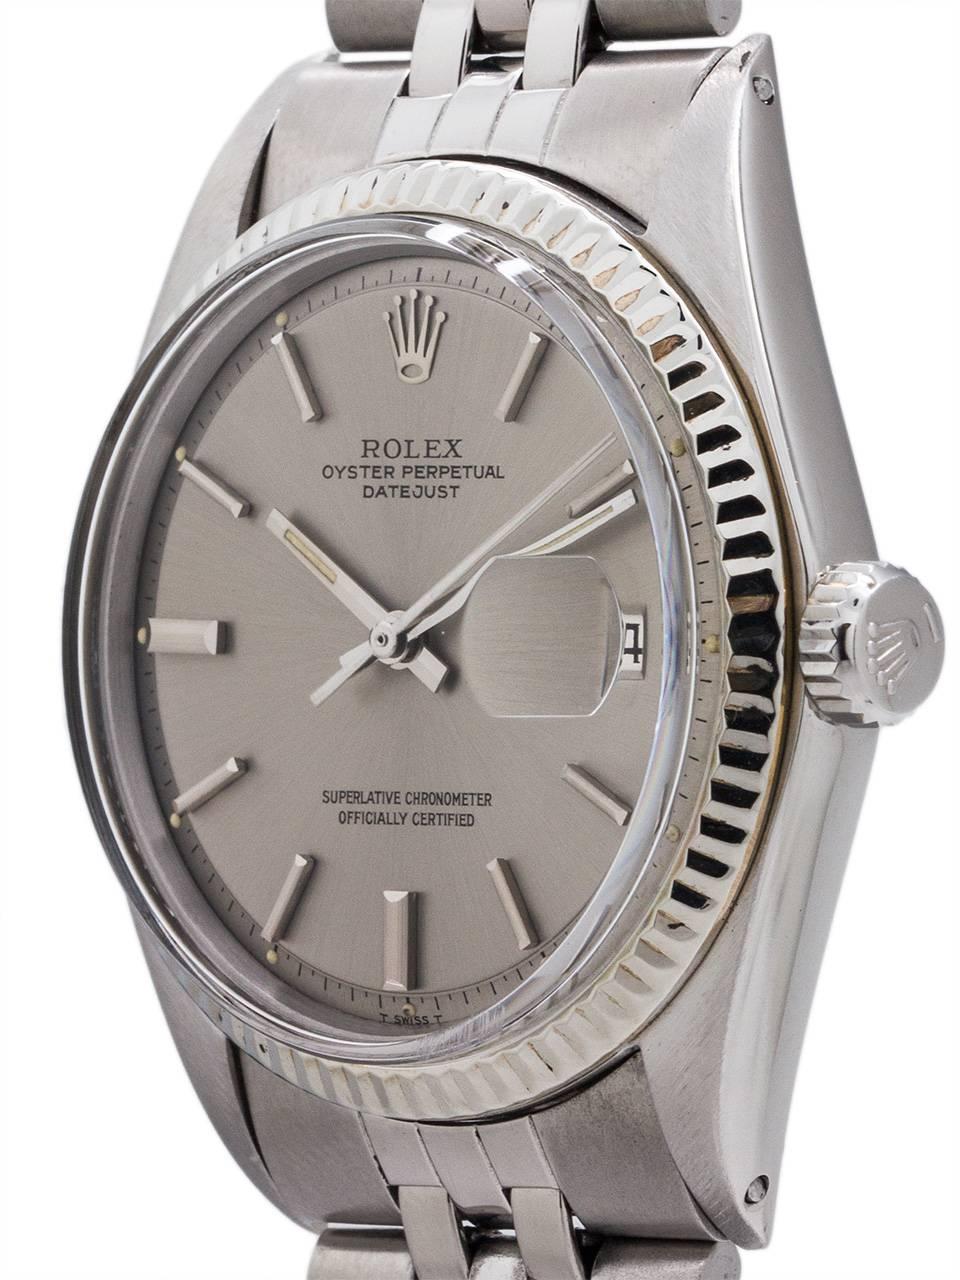 Rolex Oyster Perpetual Datejust ref 1601 serial# 3.0 million circa 1972. Featuring a 36mm diameter case with 14K WG fluted bezel and acrylic crystal and original gray pie pan dial with applied silver indexes and silver baton hands. Powered by